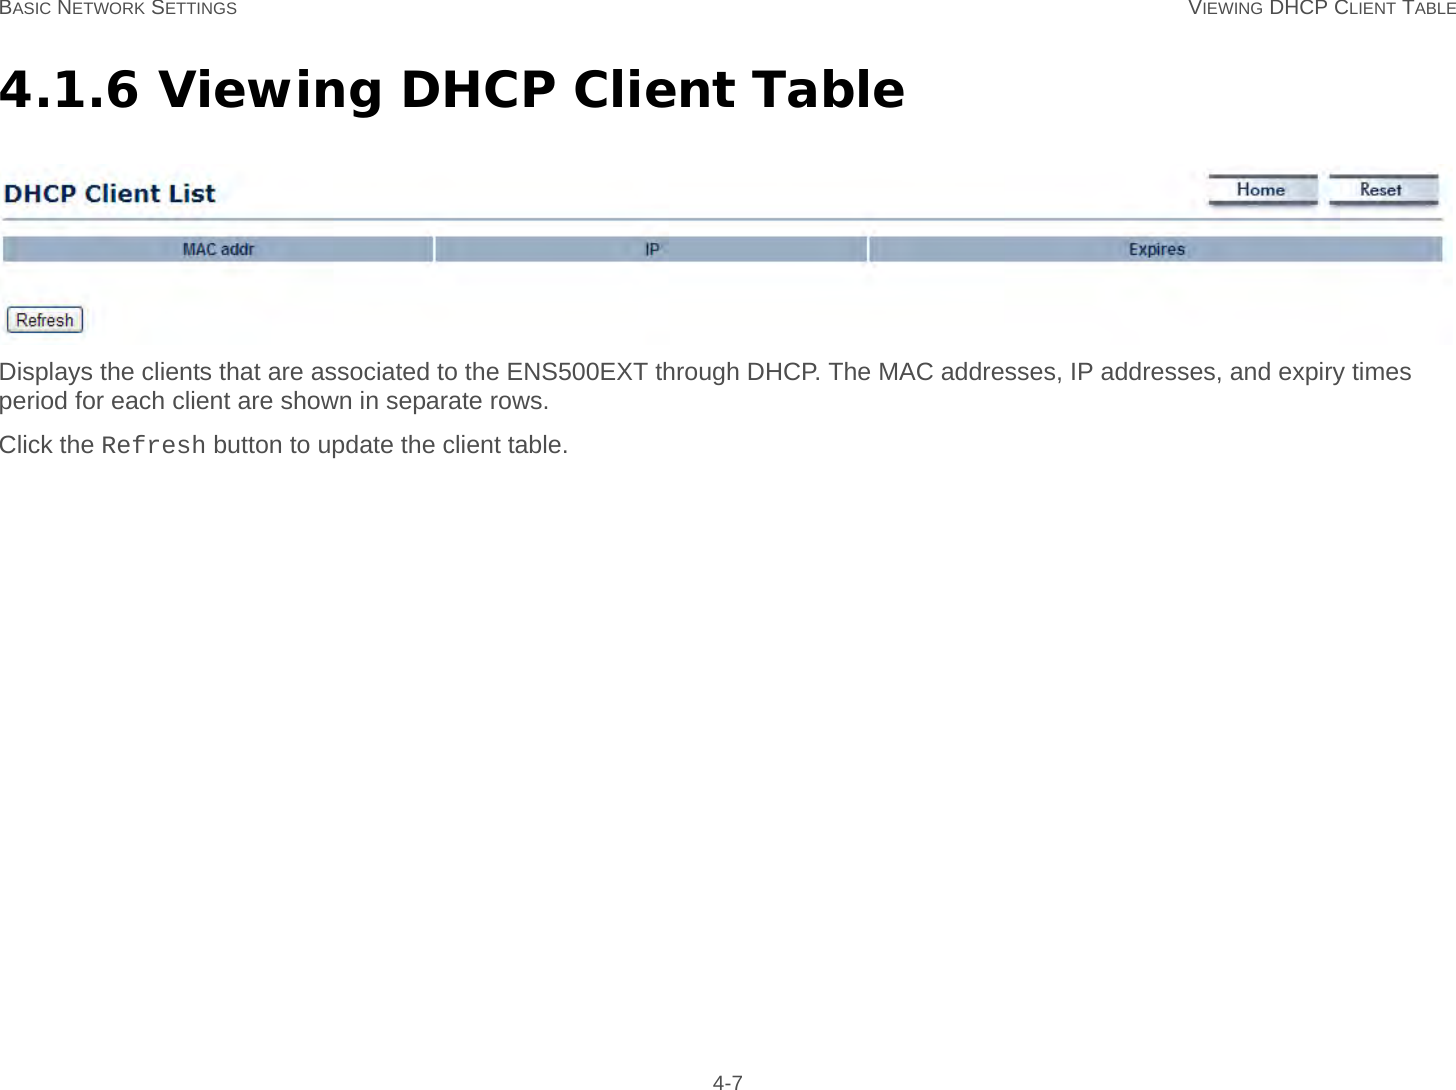 BASIC NETWORK SETTINGS VIEWING DHCP CLIENT TABLE 4-74.1.6 Viewing DHCP Client TableDisplays the clients that are associated to the ENS500EXT through DHCP. The MAC addresses, IP addresses, and expiry times period for each client are shown in separate rows.Click the Refresh button to update the client table.